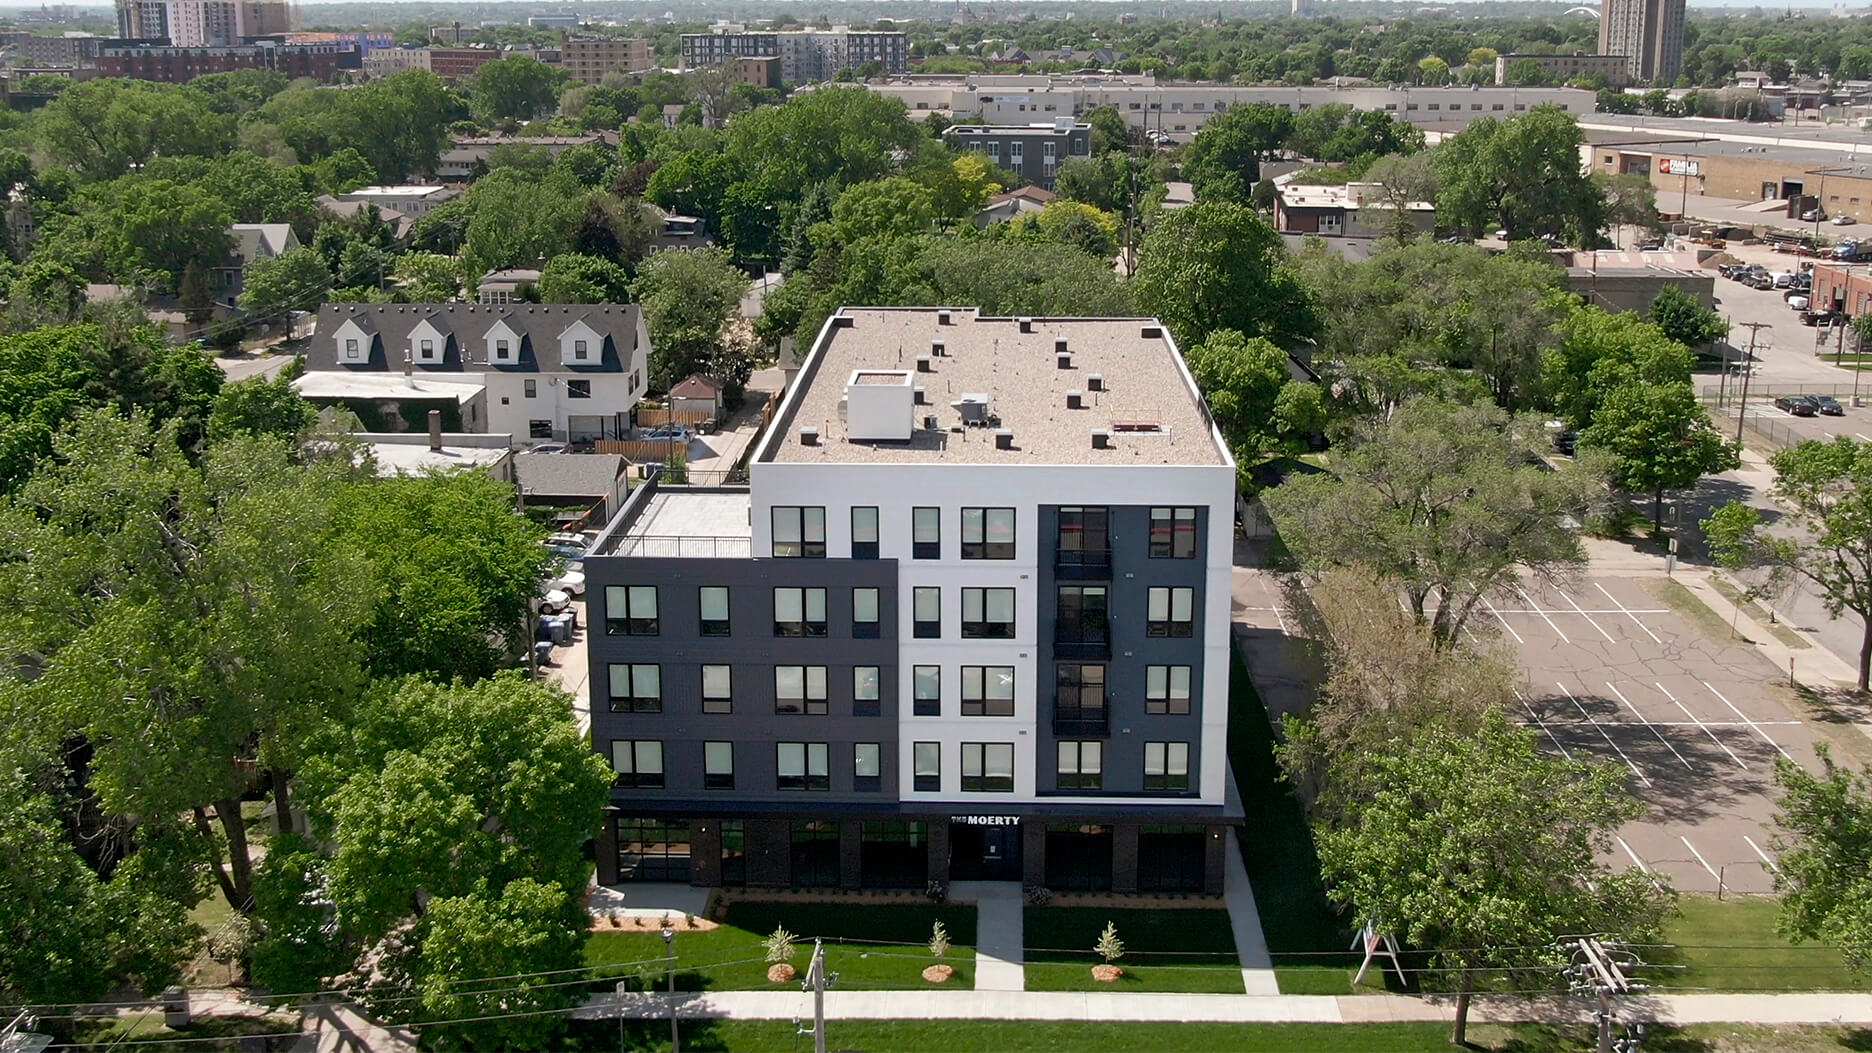 Aerial view of a modern apartment building in a green urban area.